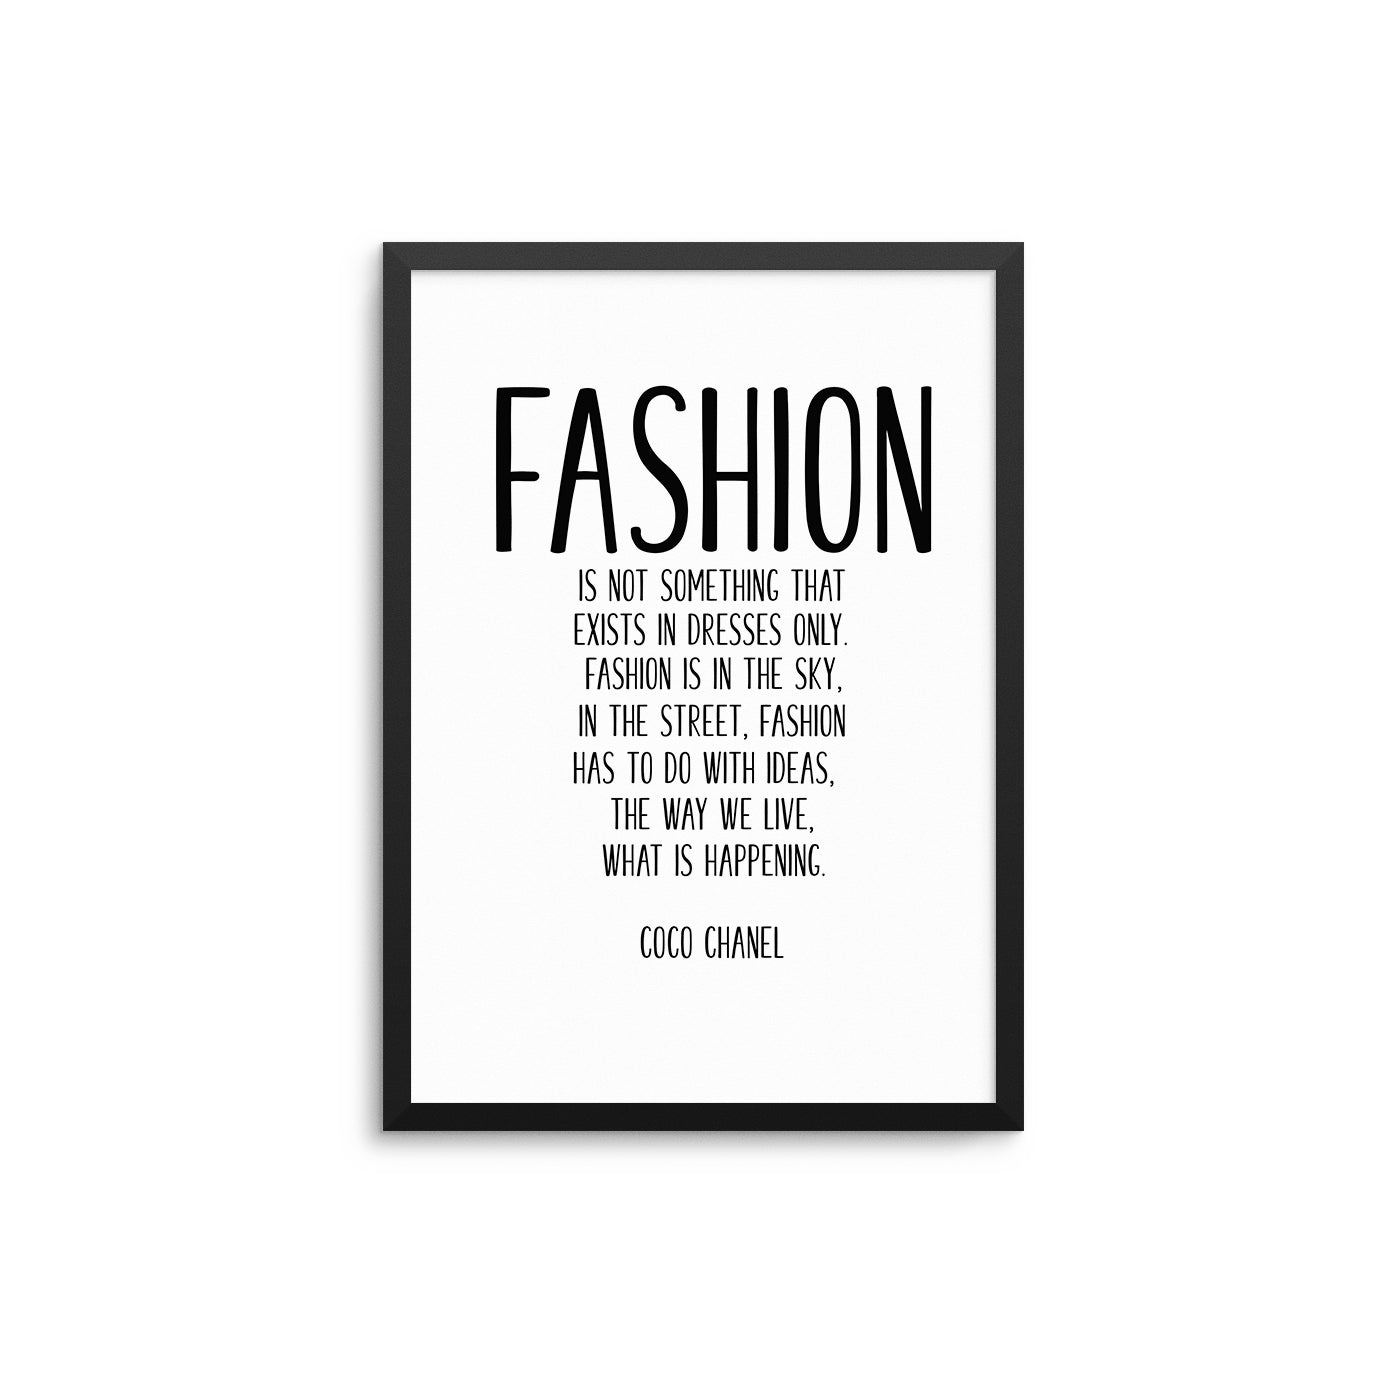 Fashion Is Not Something That Exists. - D'Luxe Prints